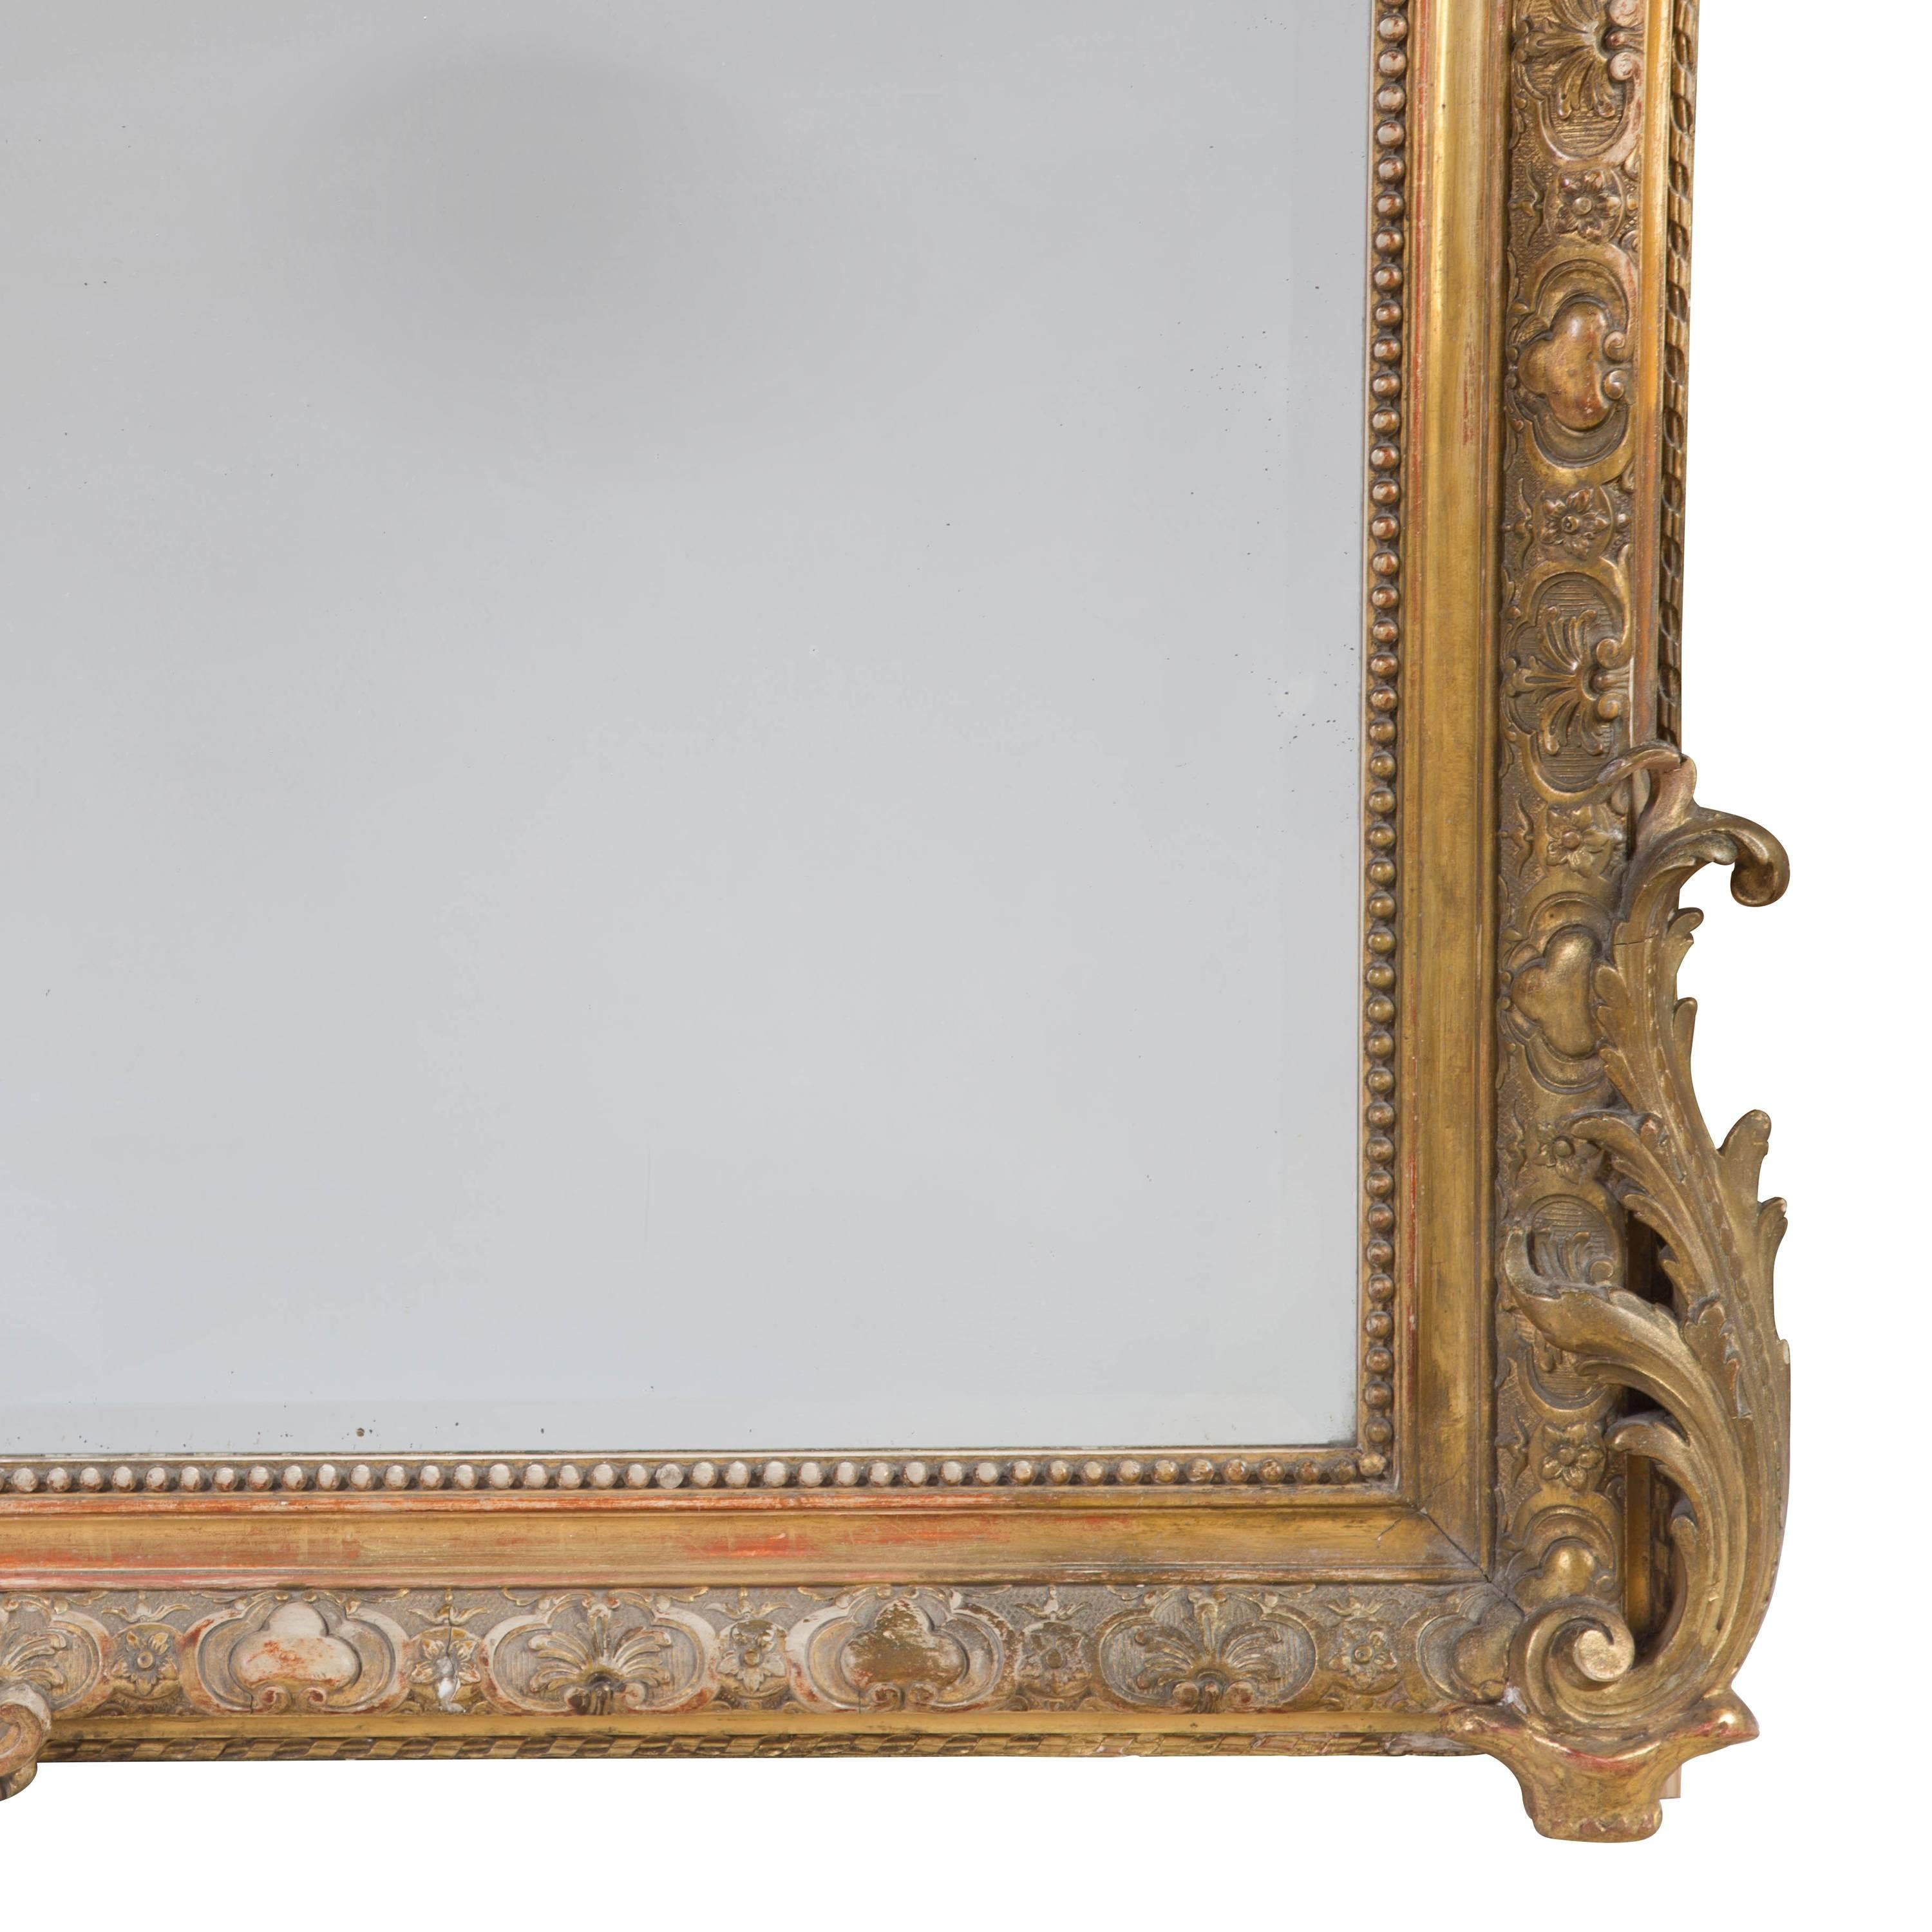 A large Louis XV revival giltwood and composition mirror with its original bevelled glass plate, with a shell cresting, French, circa 1875.